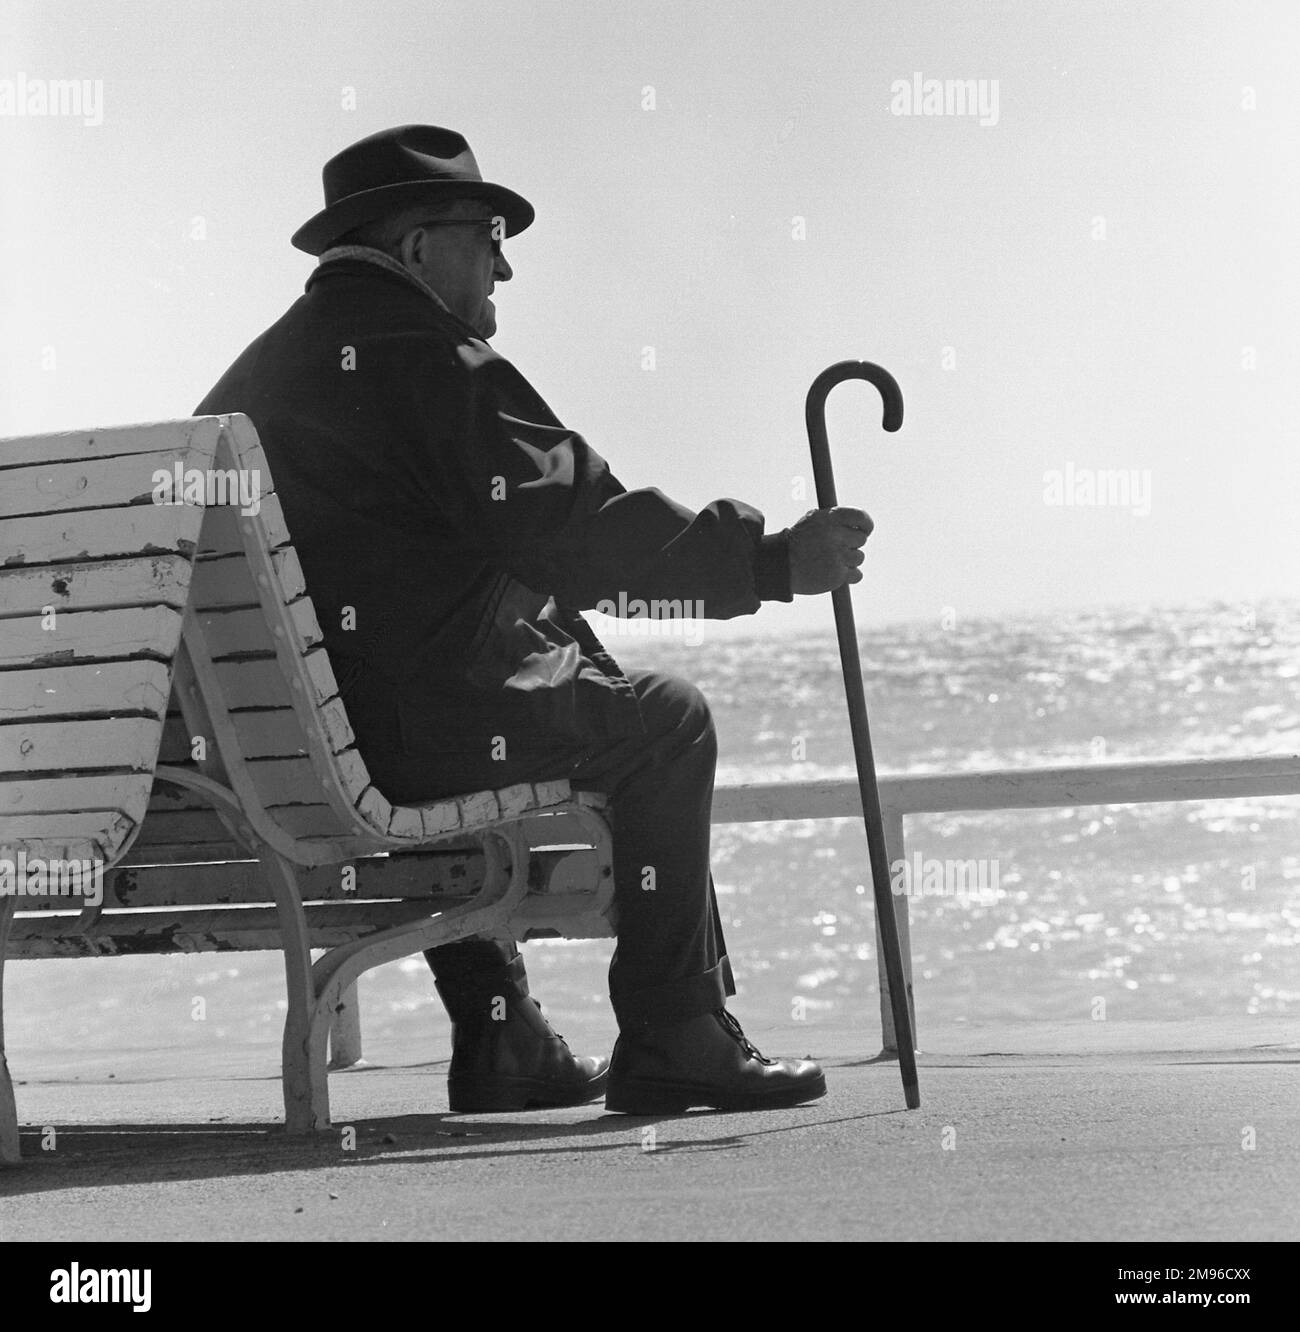 An old man with a walking stick, sitting on a bench looking out to sea. Stock Photo